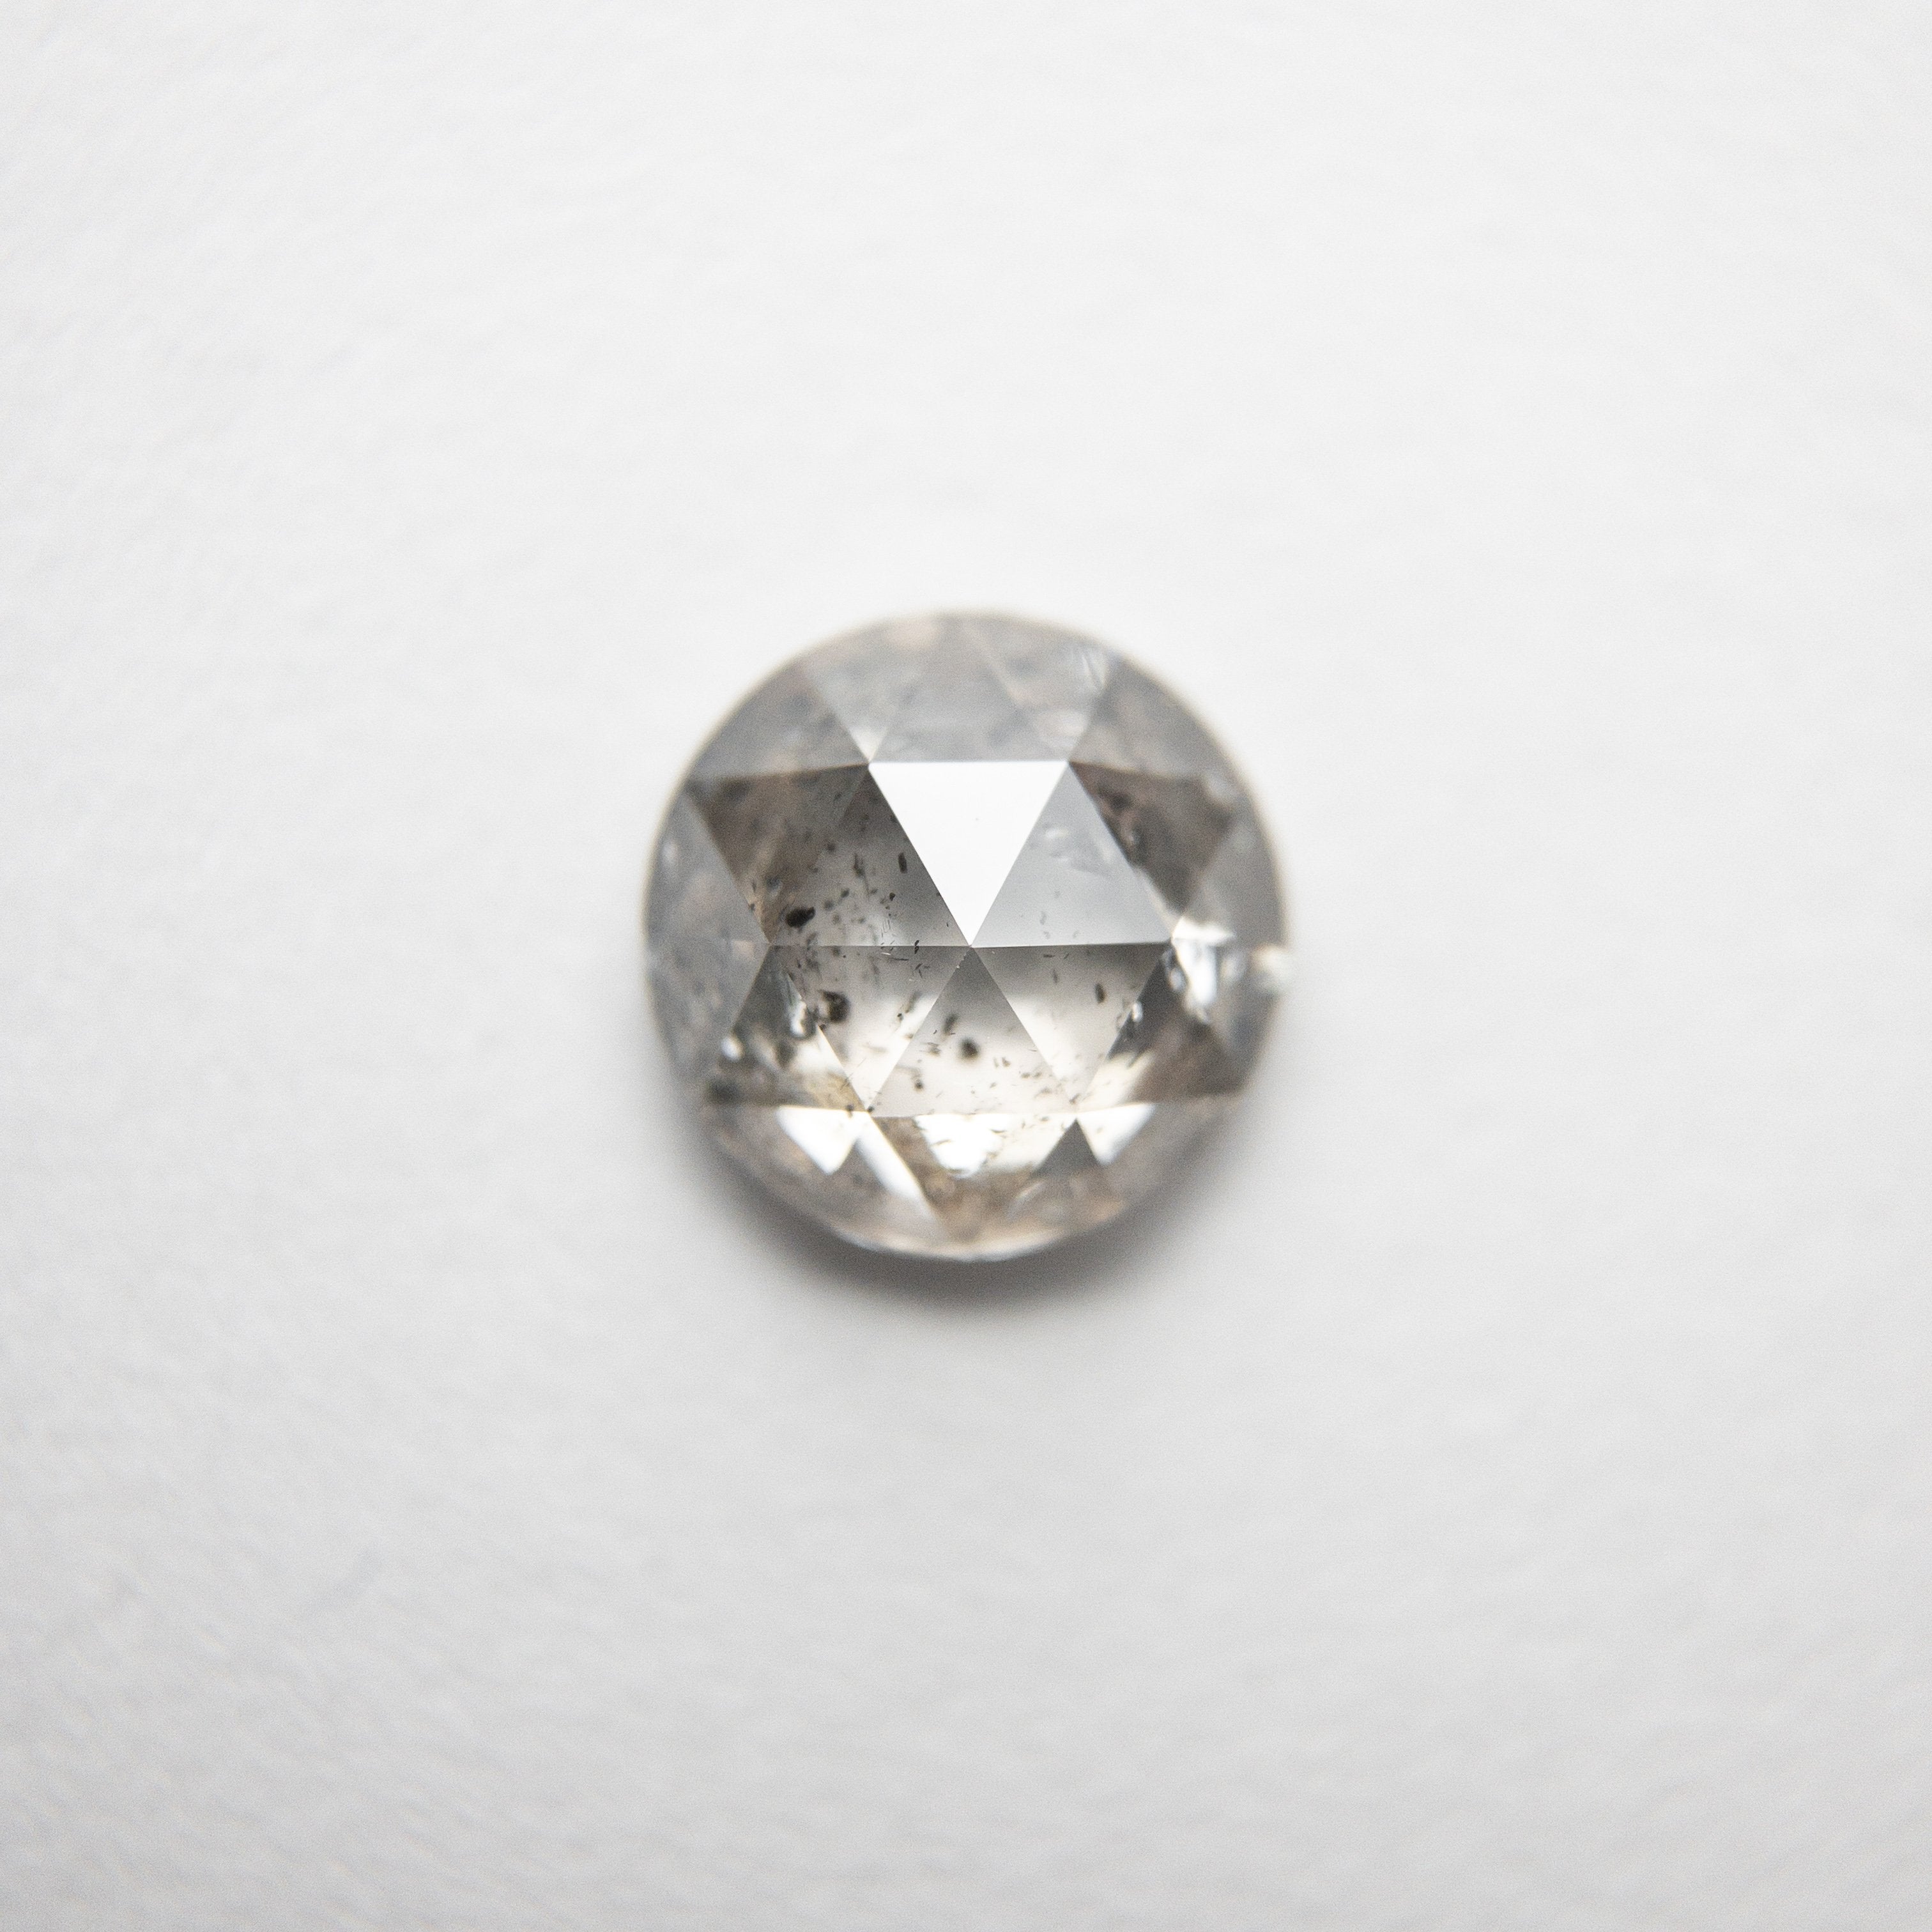 0.94ct 6.39x6.34x2.70mm Round Rosecut 18434-10 HOLD D1766 1.16.21